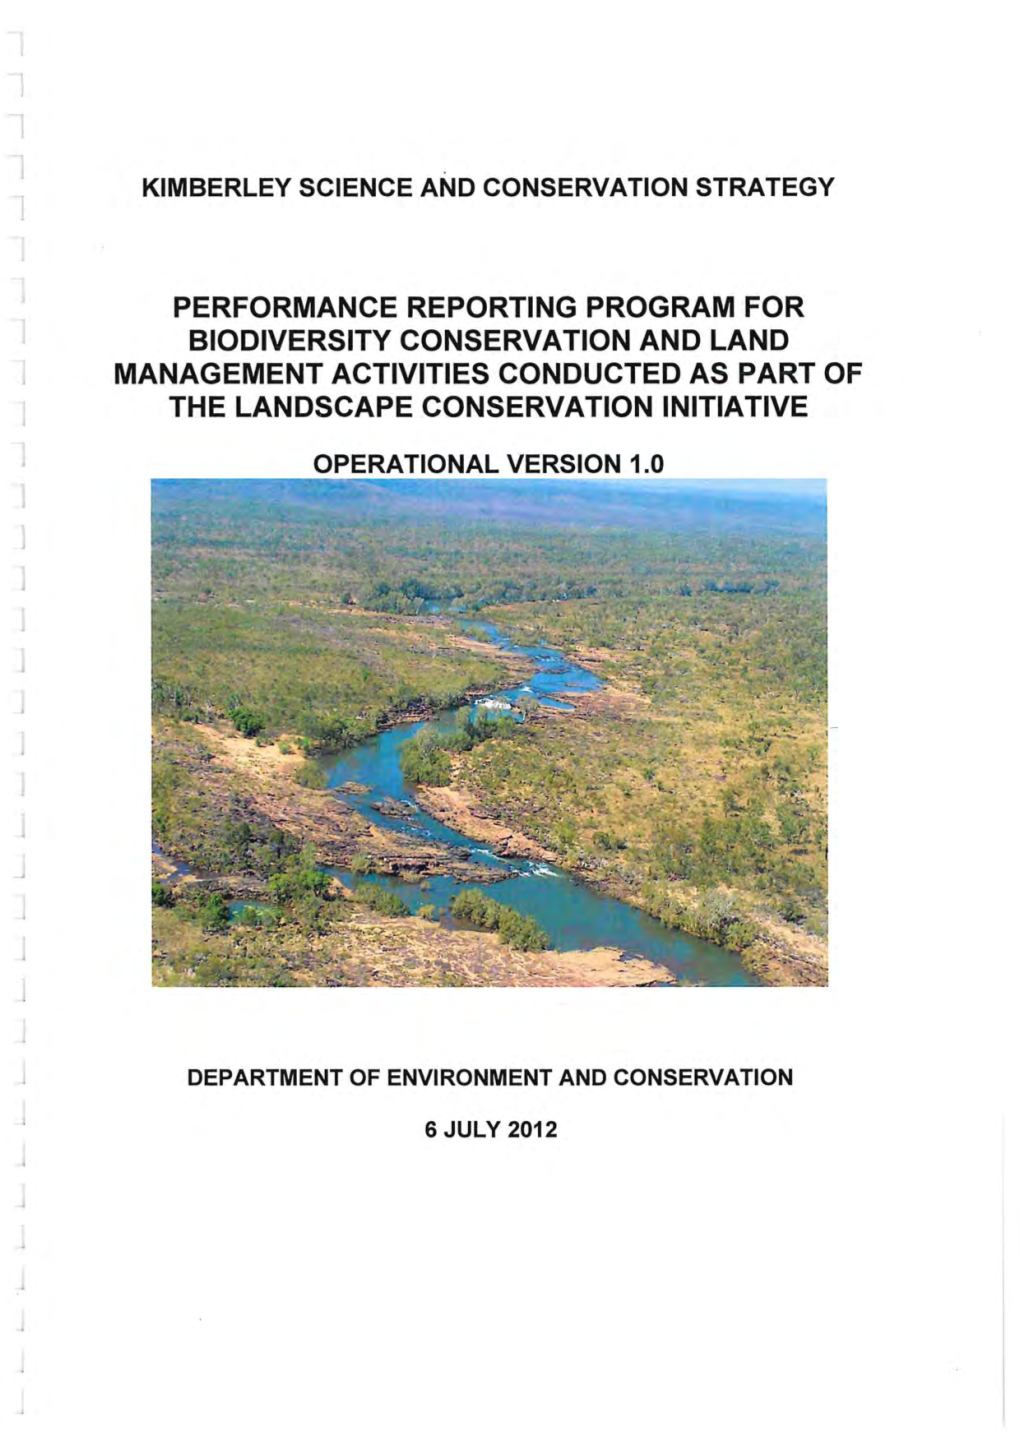 Performance Reporting Program for Biodiversity Conservation and Land Management Activities Conducted As Part of the Landscape Conservation Initiative